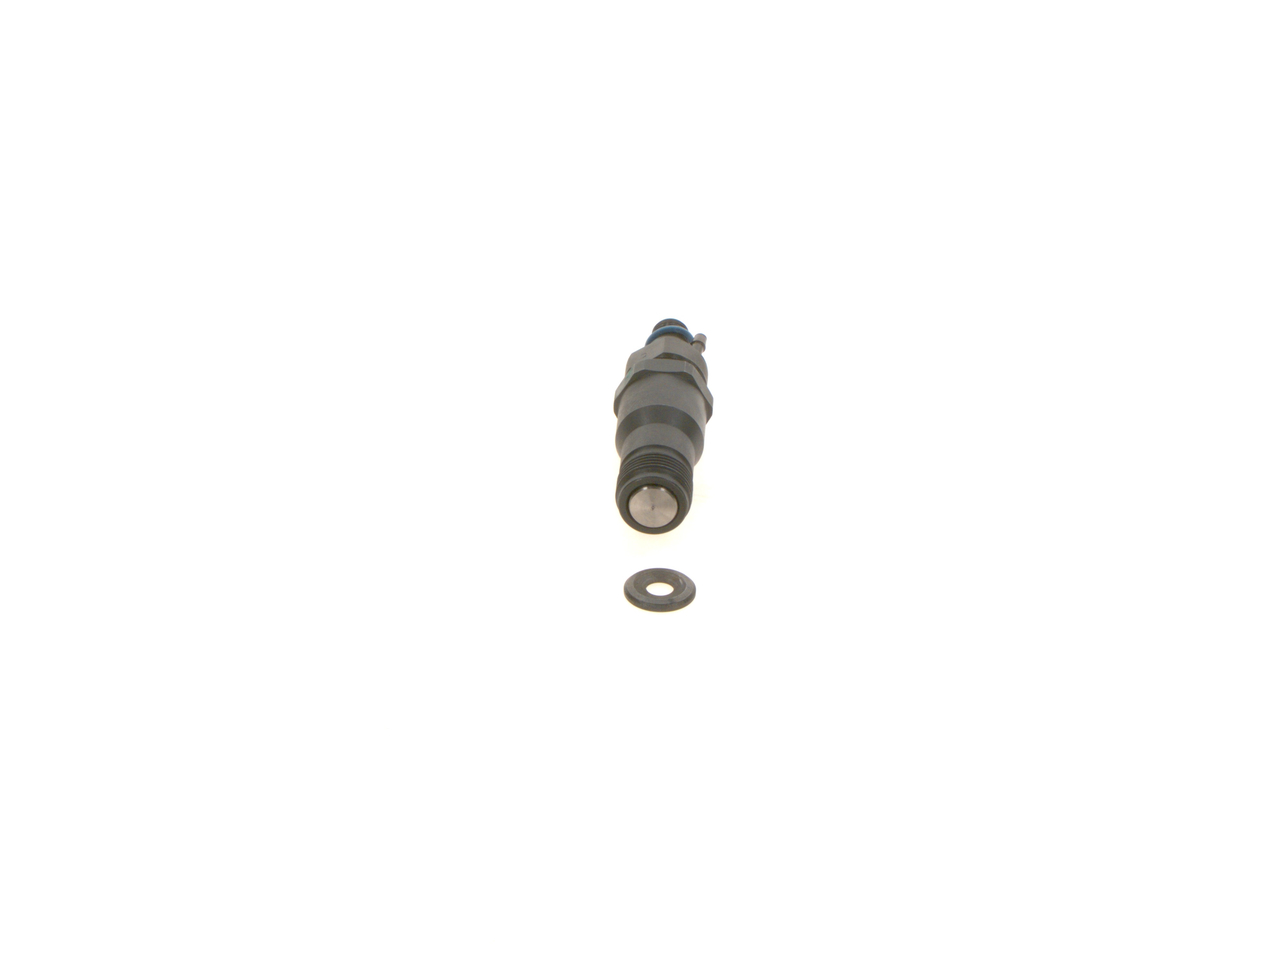 BOSCH 0 986 430 173 Nozzle and Holder Assembly